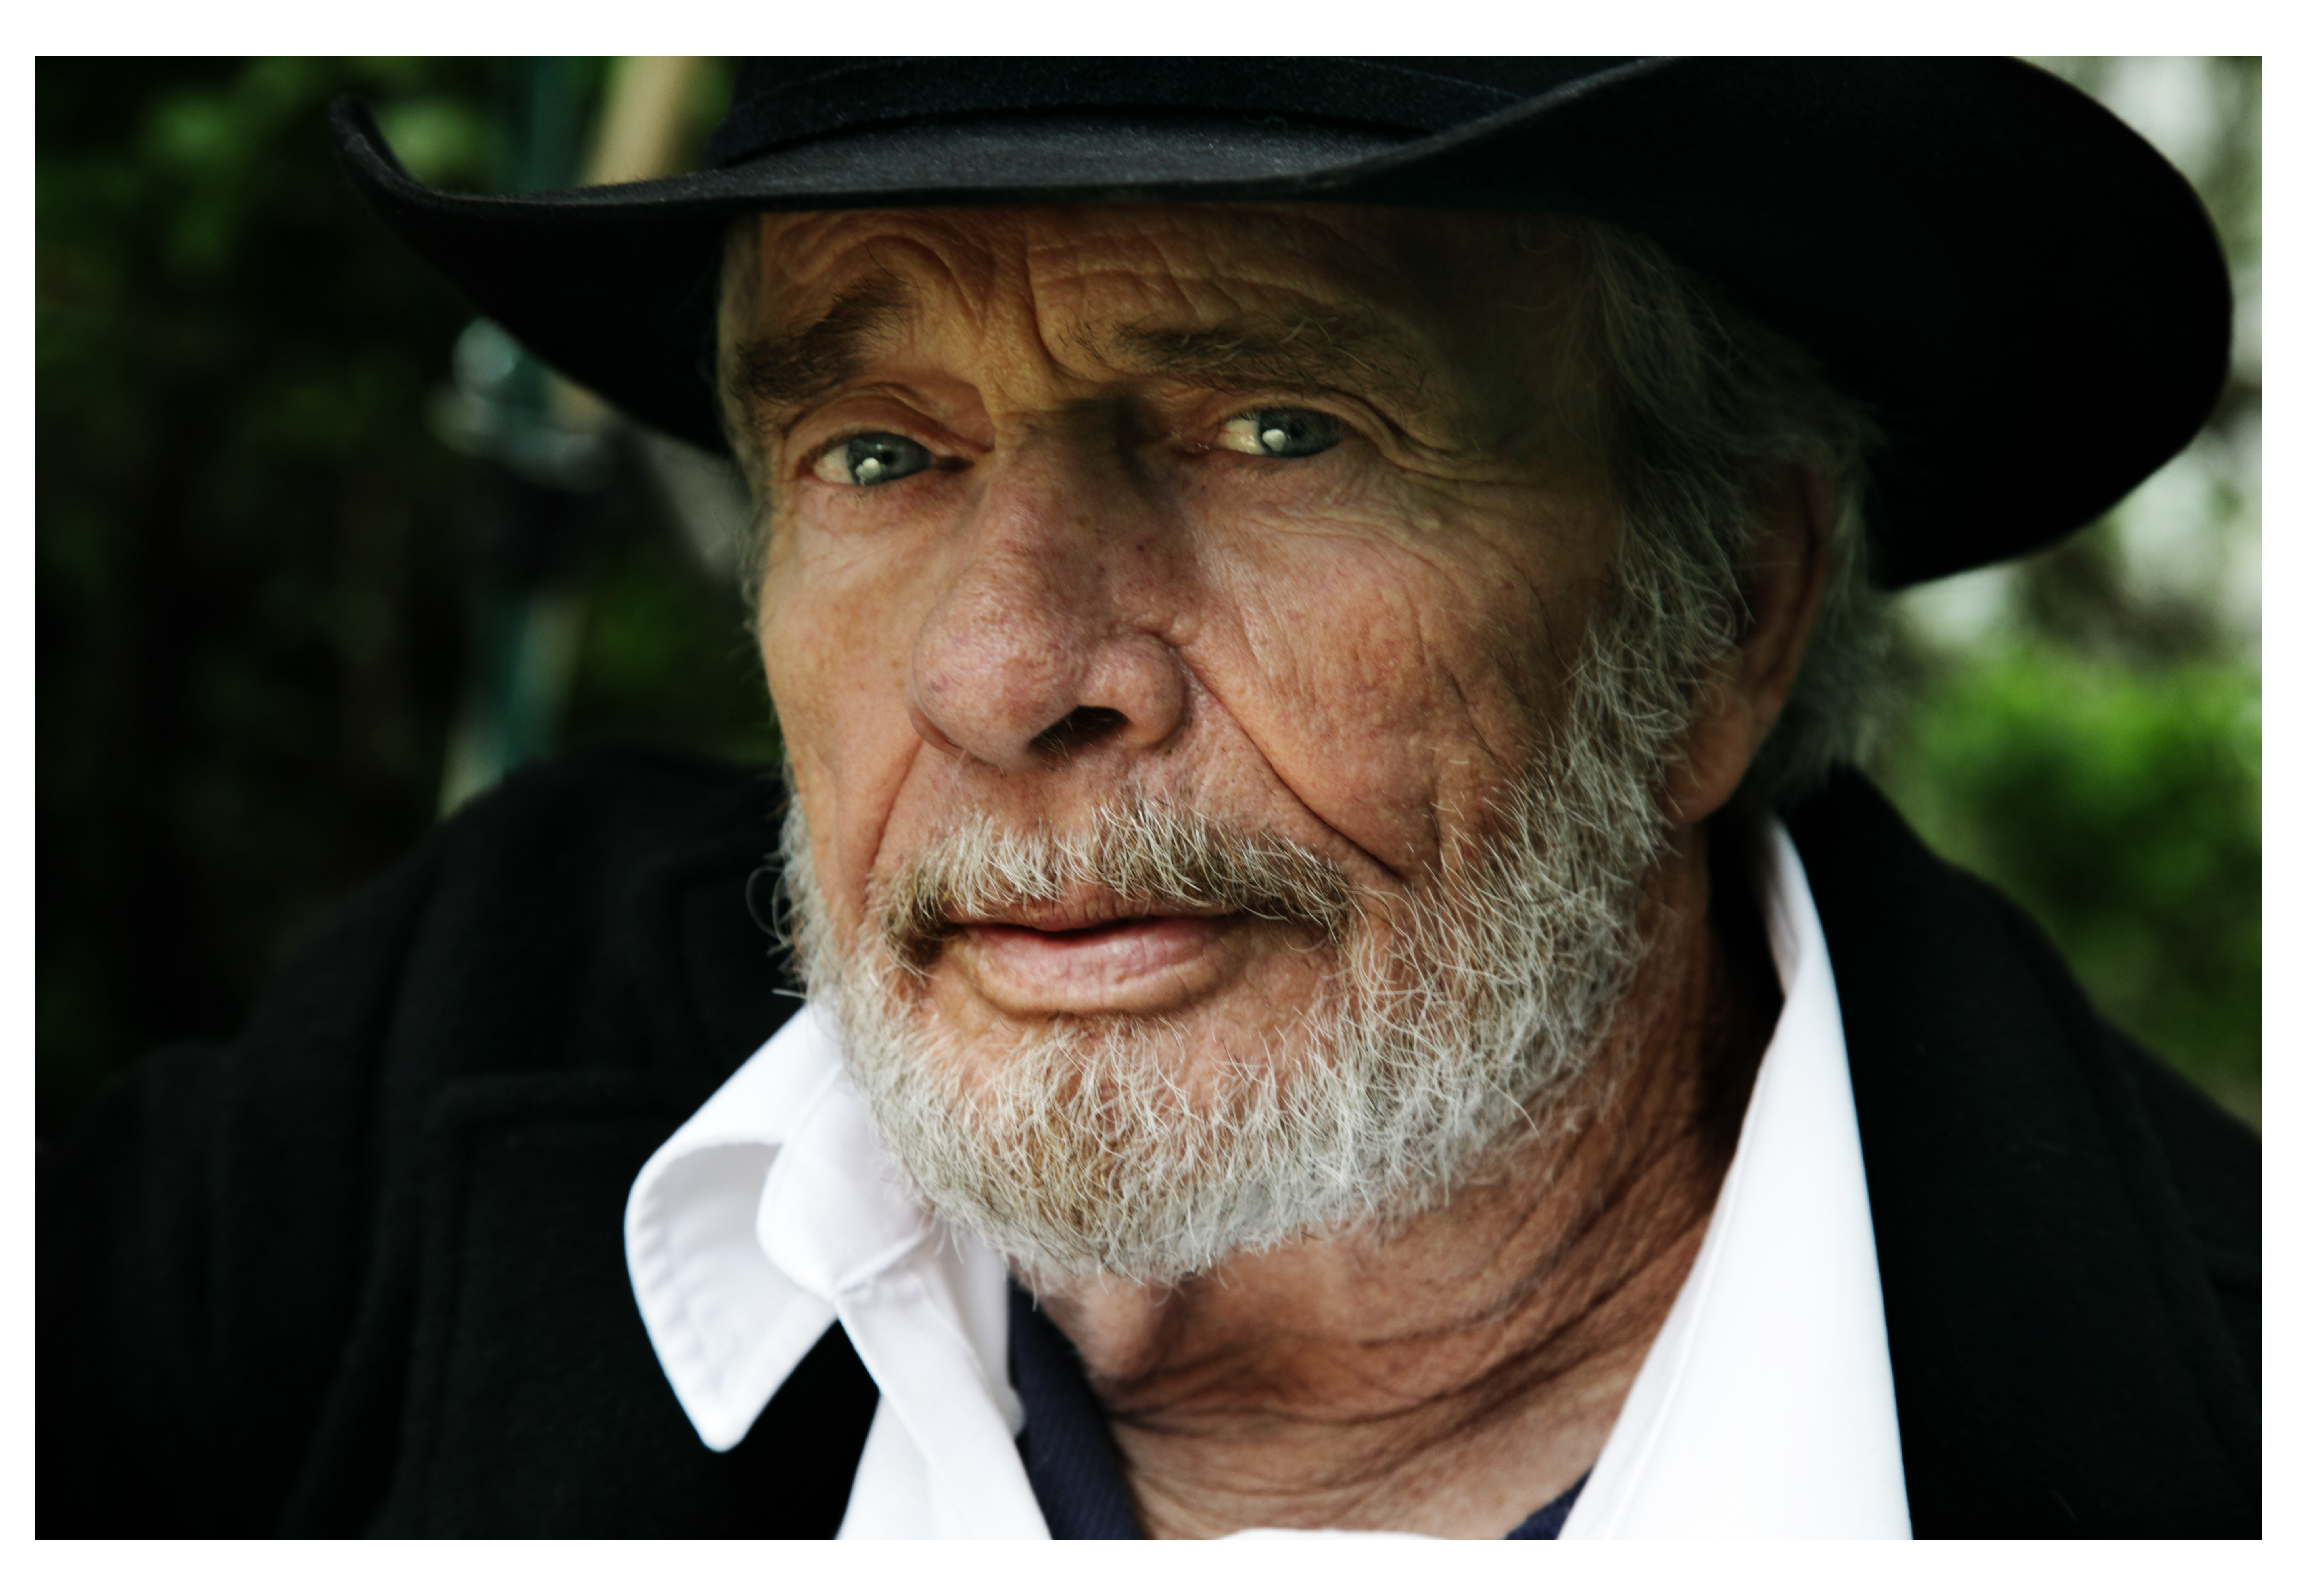 Merle Haggard Backgrounds, Compatible - PC, Mobile, Gadgets| 5791x4024 px